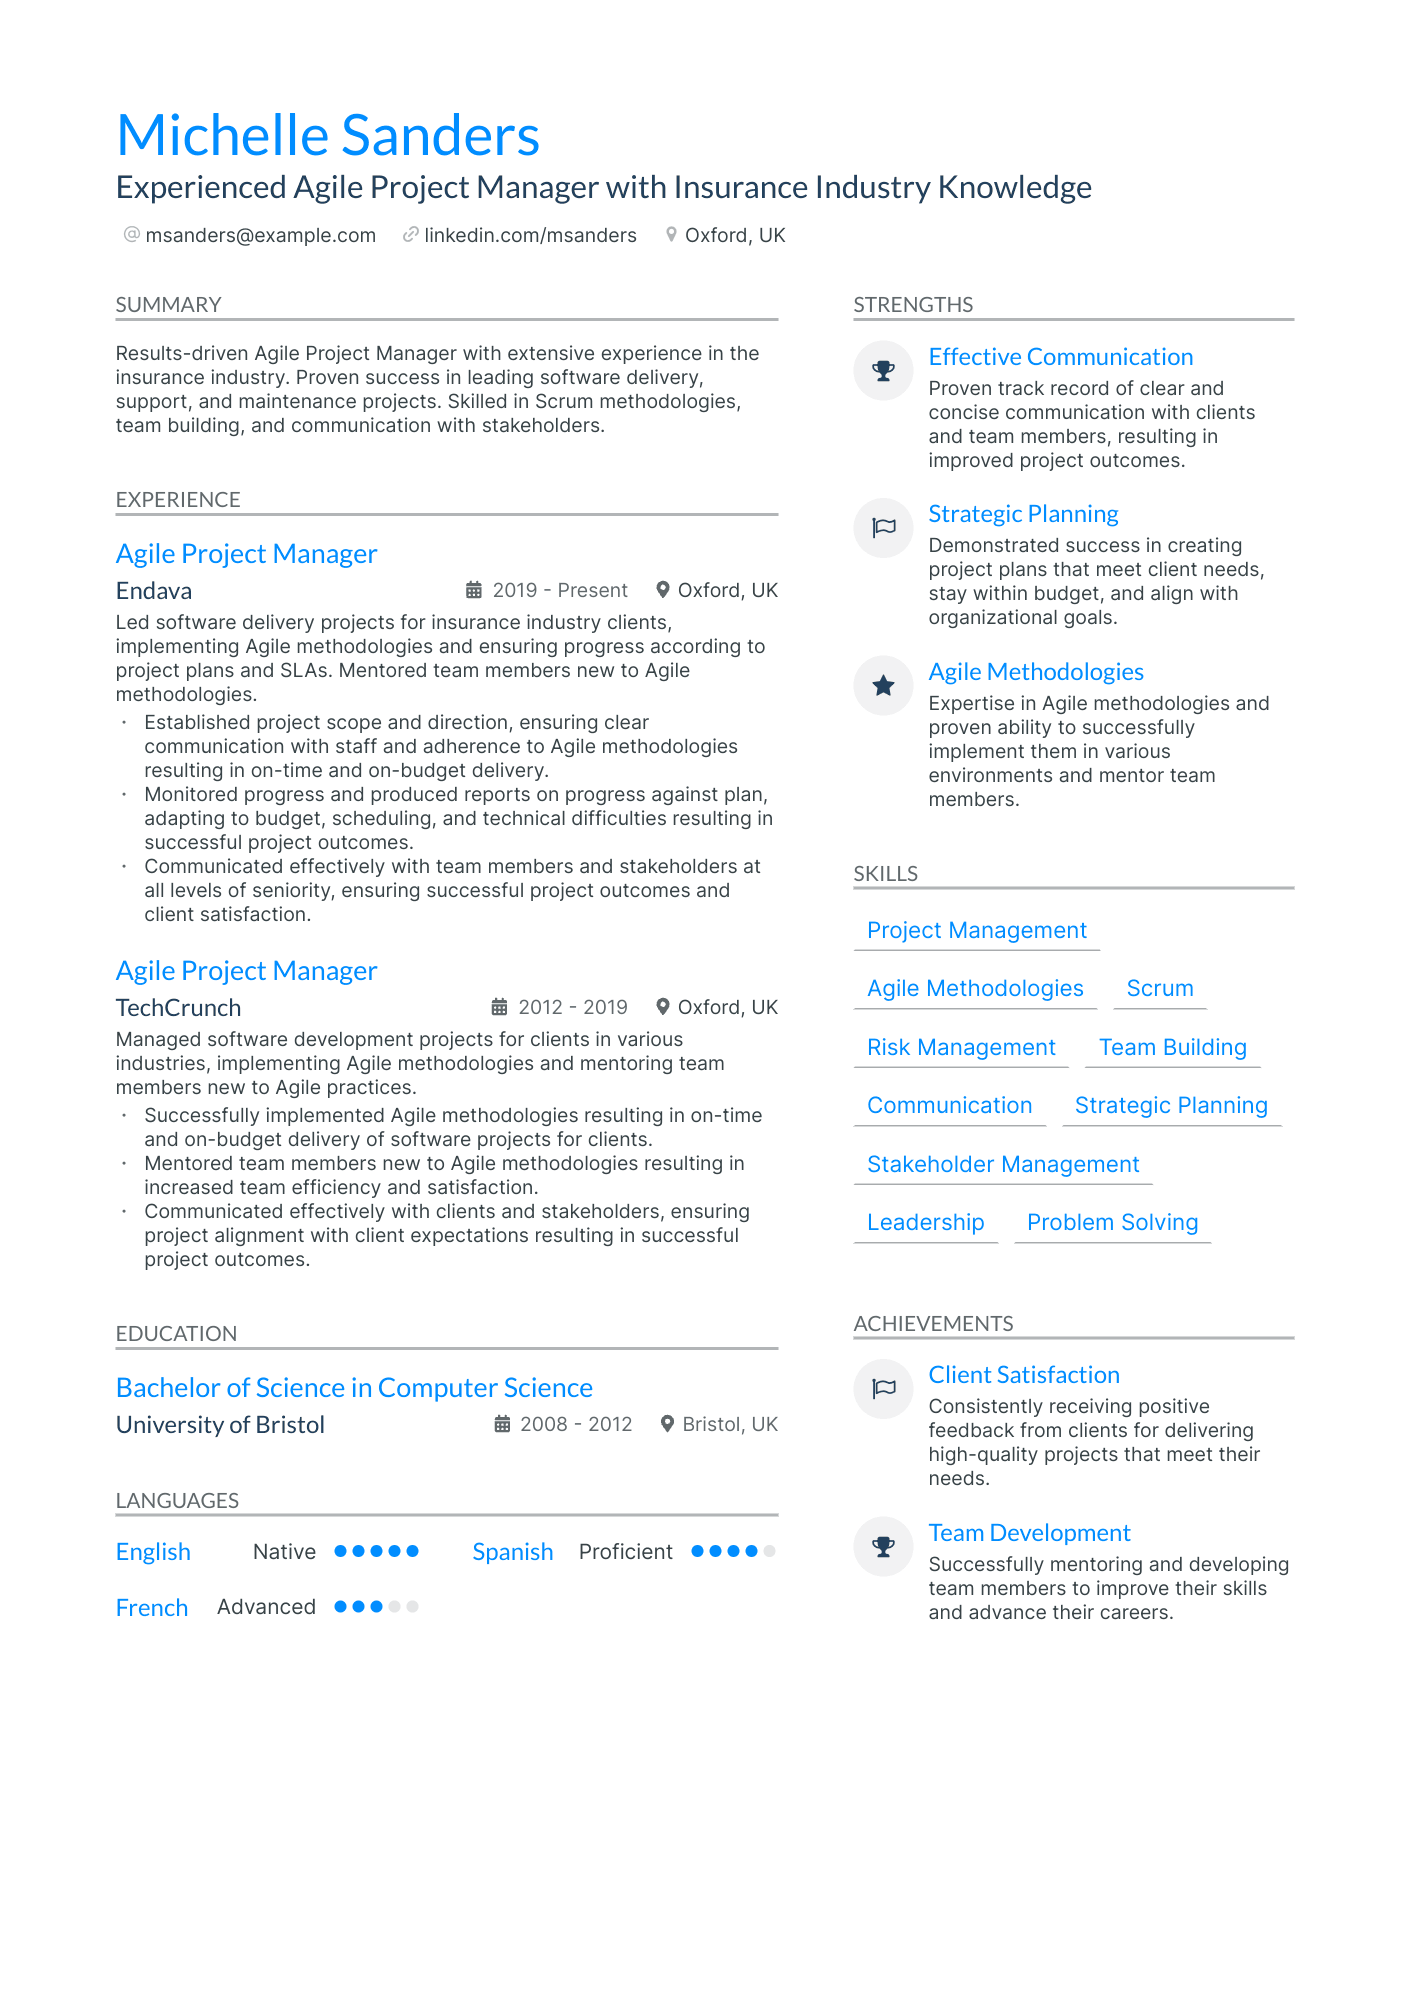 Experienced Agile Project Manager with Insurance Industry Knowledge CV example